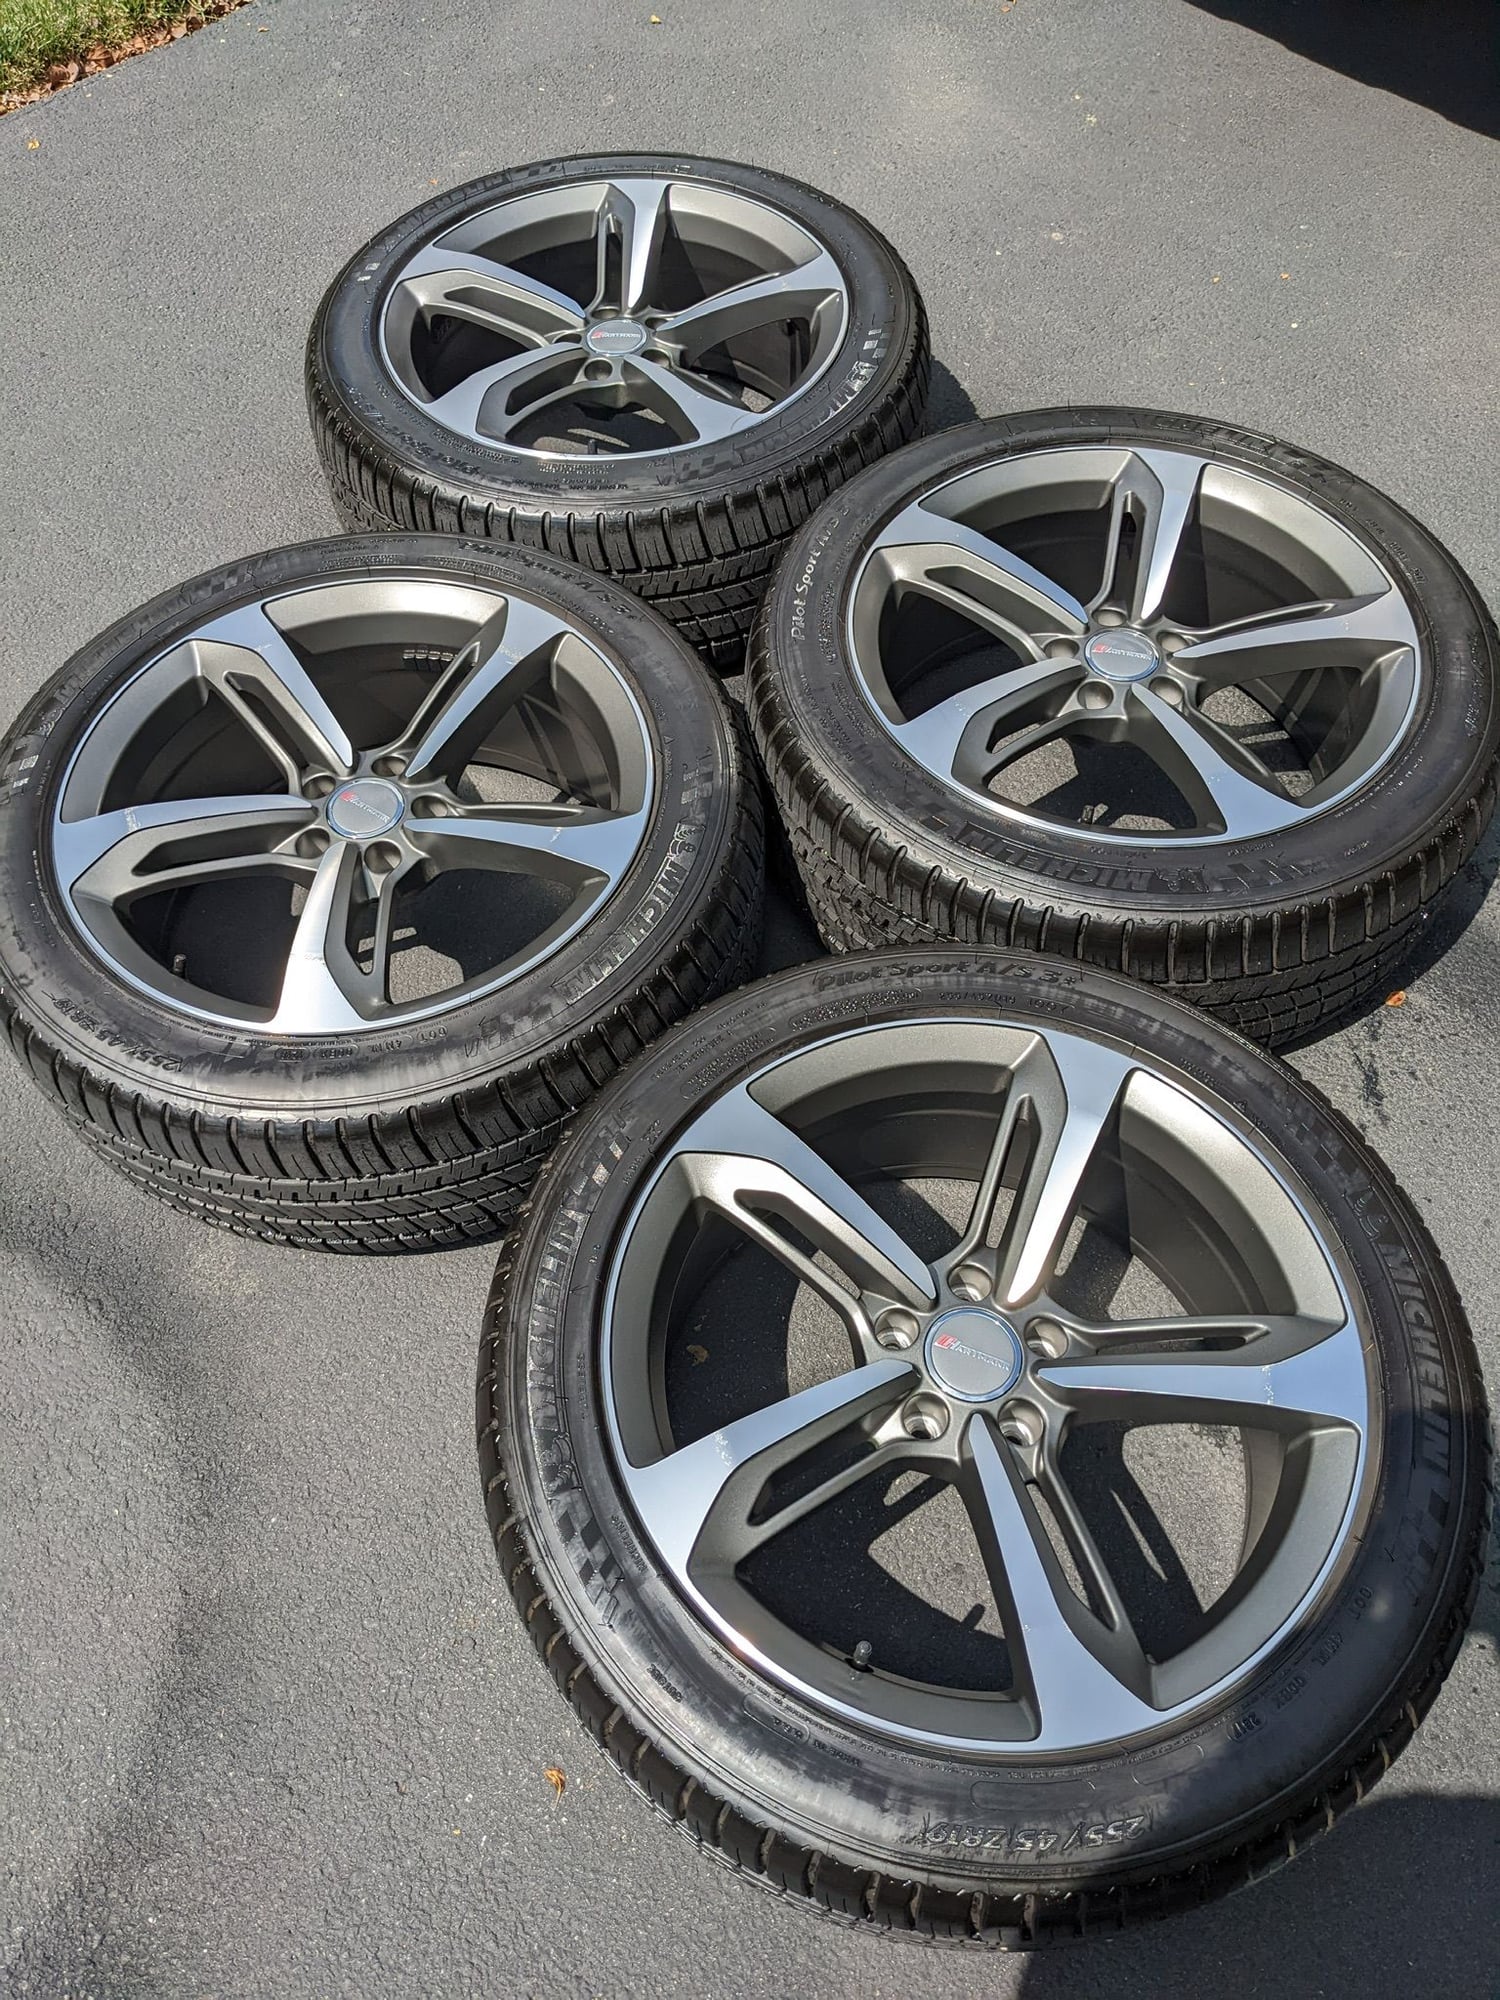 Wheels and Tires/Axles - Michelin Pilot Sport All Season 255/45ZR19 on Hartmann Wheels - Used - 0  All Models - Kennett Square, PA 19348, United States